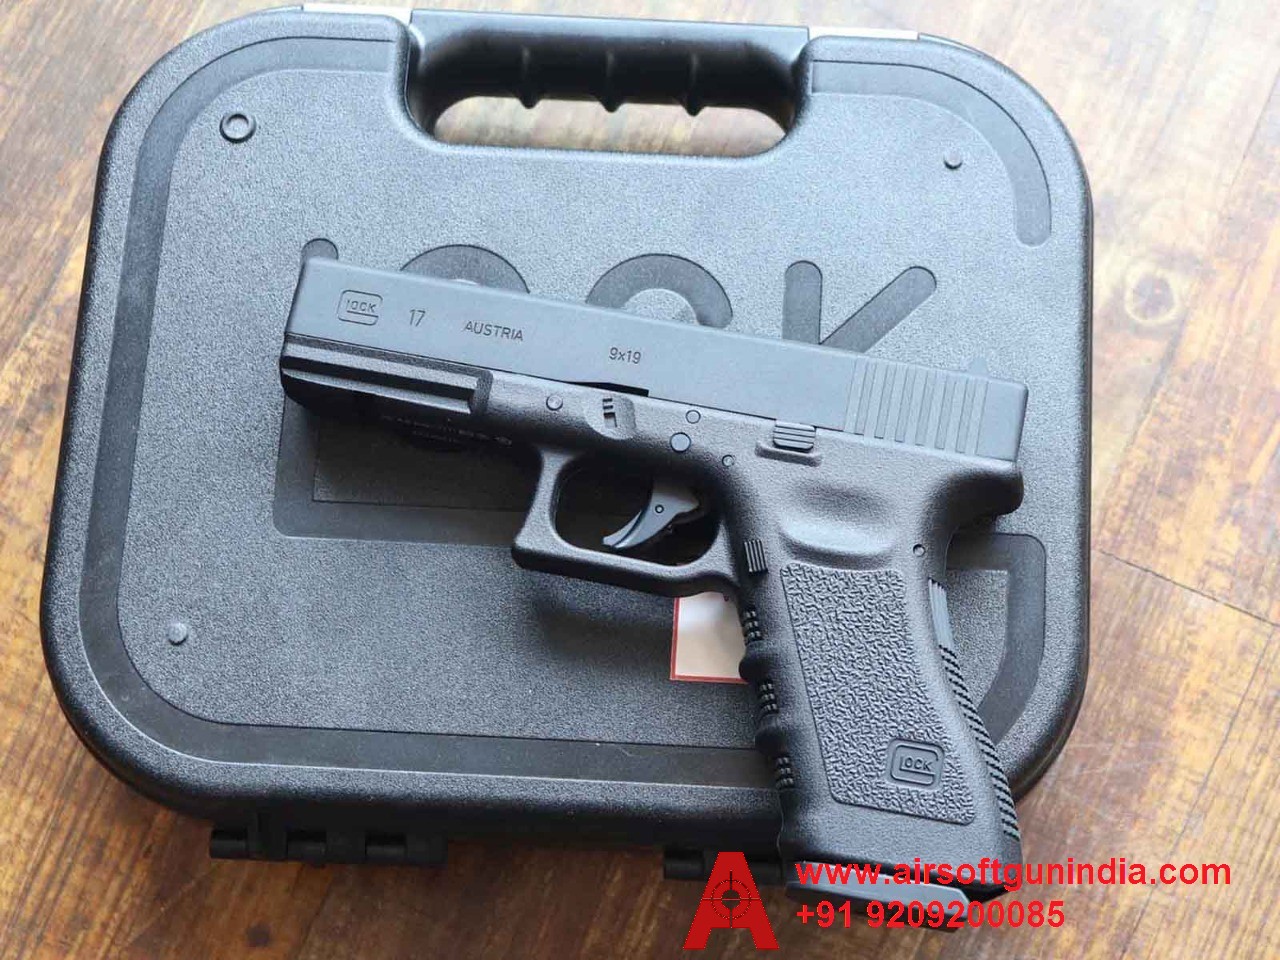 Glock 17 Generation 3 Co2 BB and Pellet .177Cal, 4.5mm Air Pistol By Airsoft  Gun India.